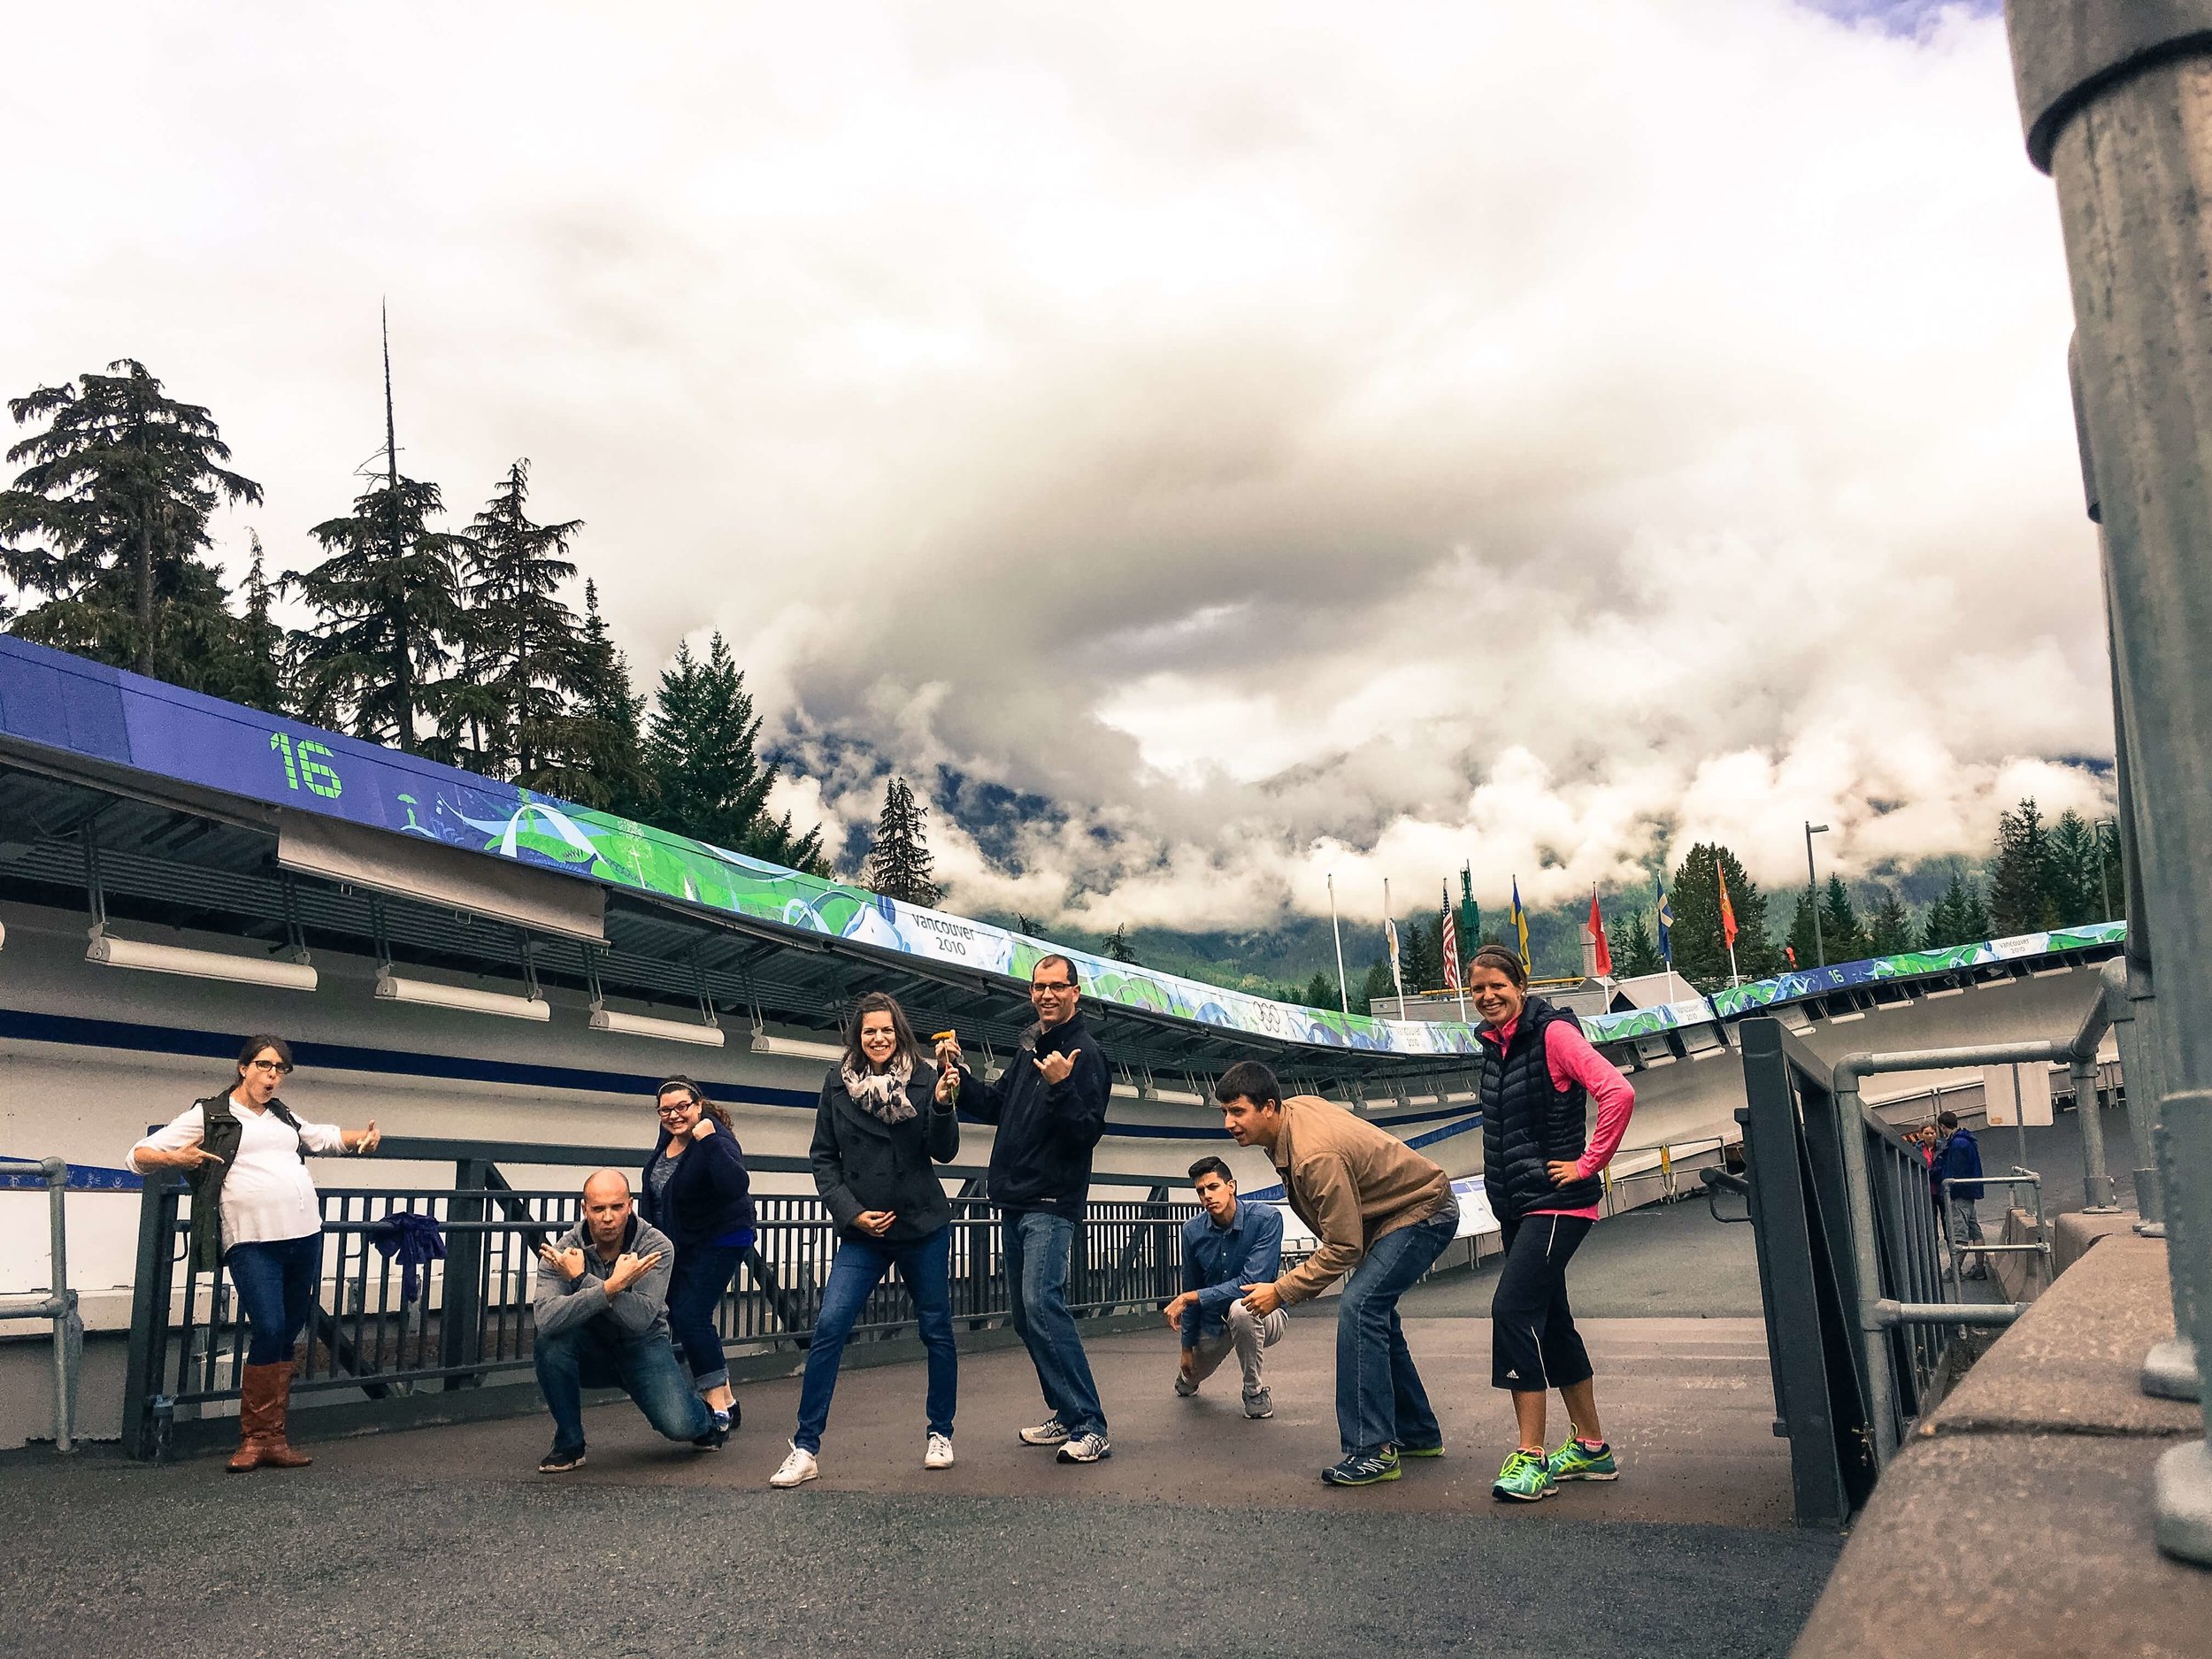  The Whistler Sliding Center in Canada, where the 2010 Winter Olympics were held. 